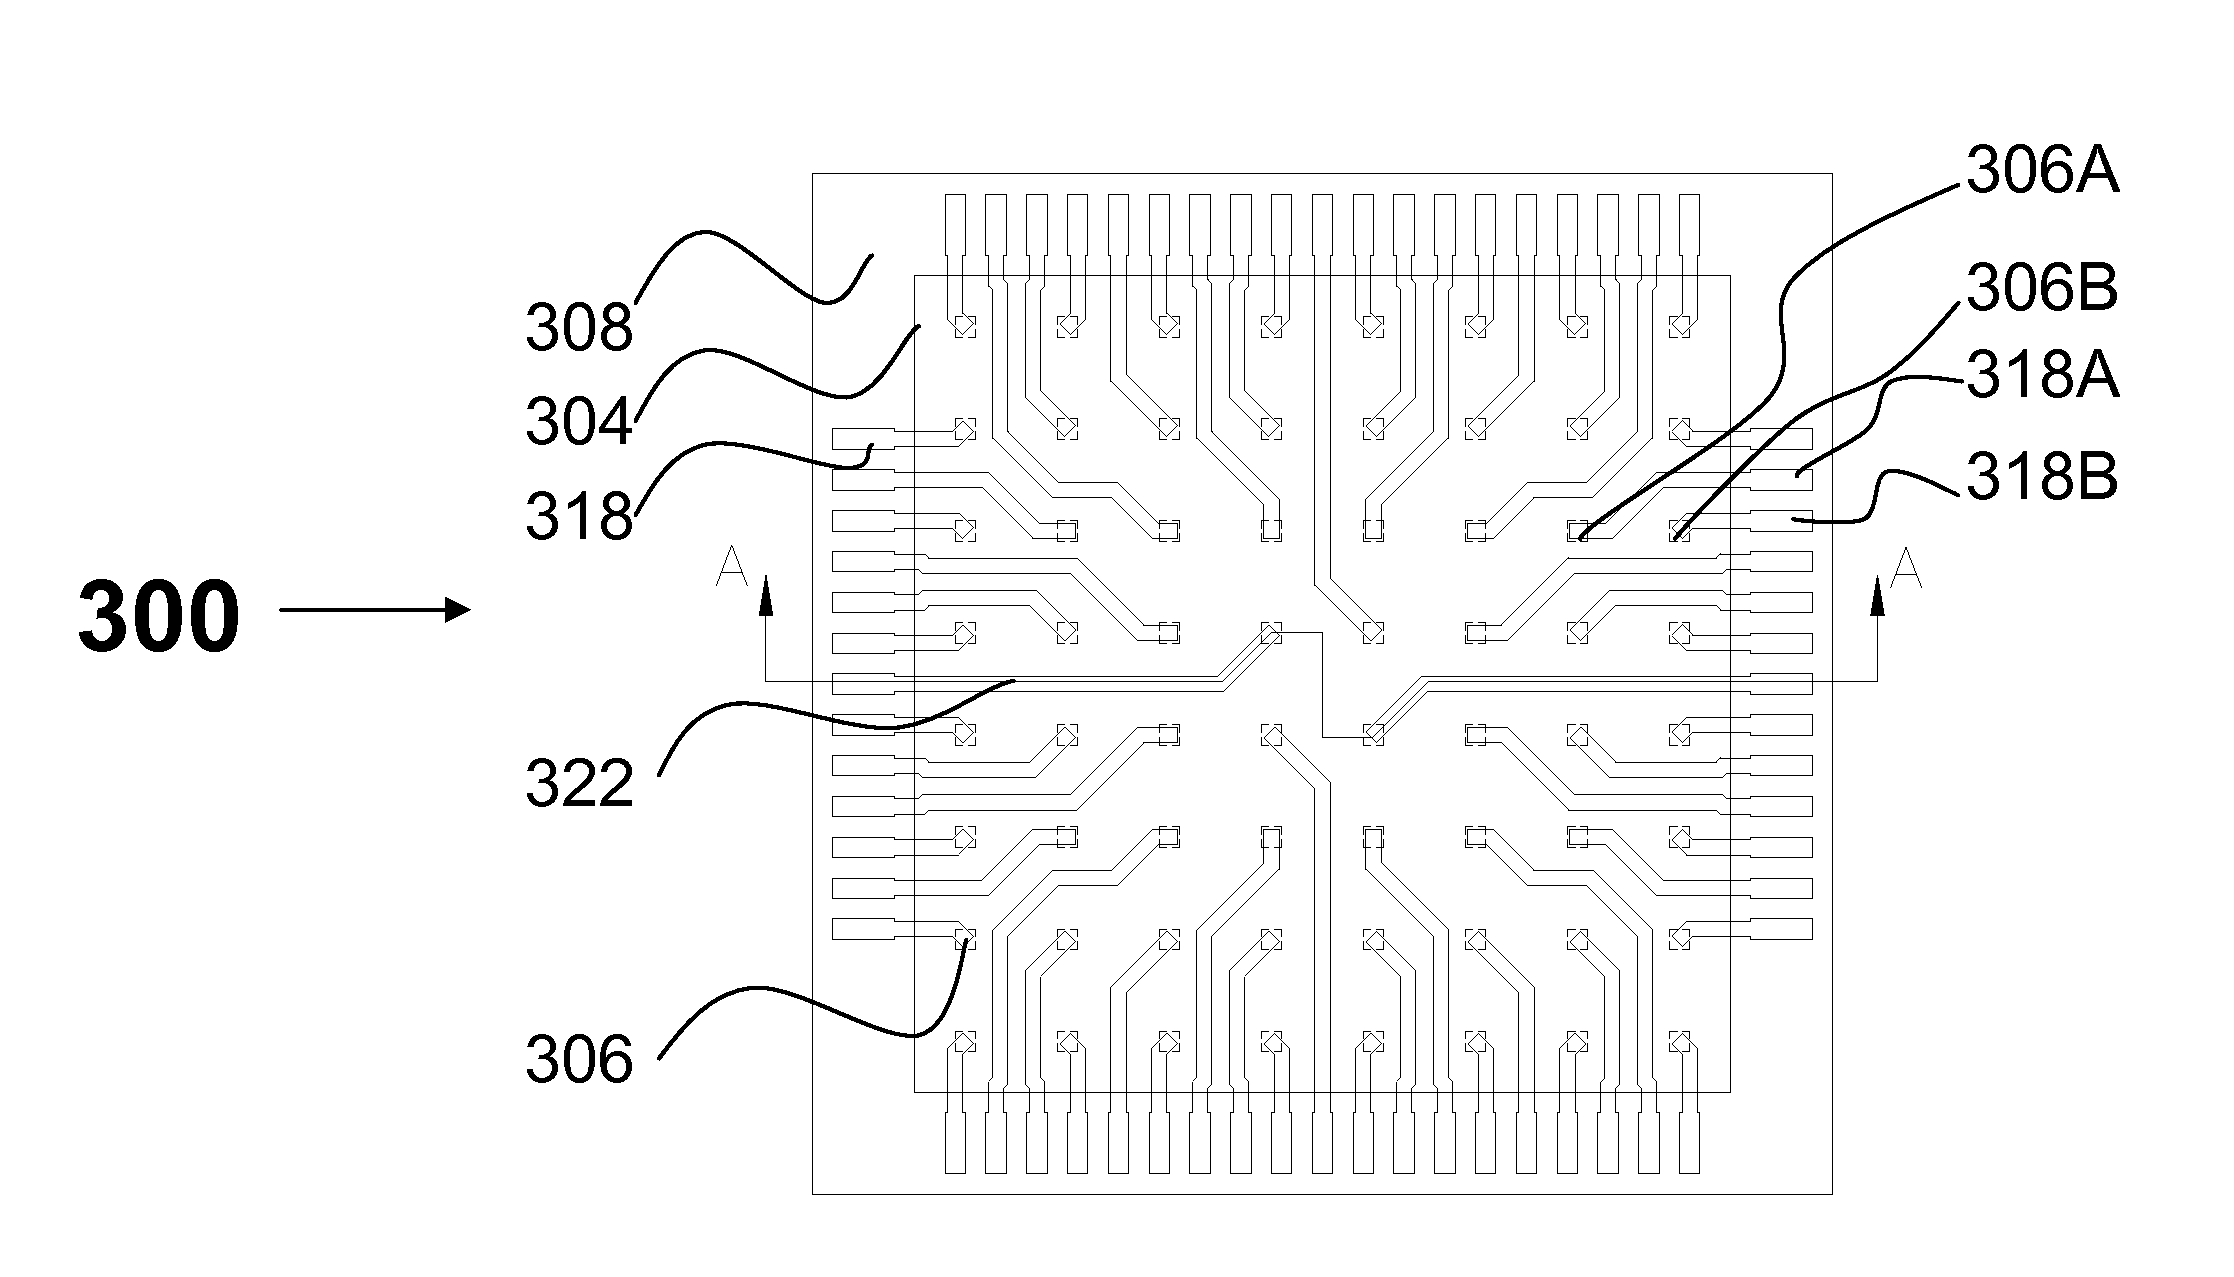 Leadless integrated circuit package having high density contacts